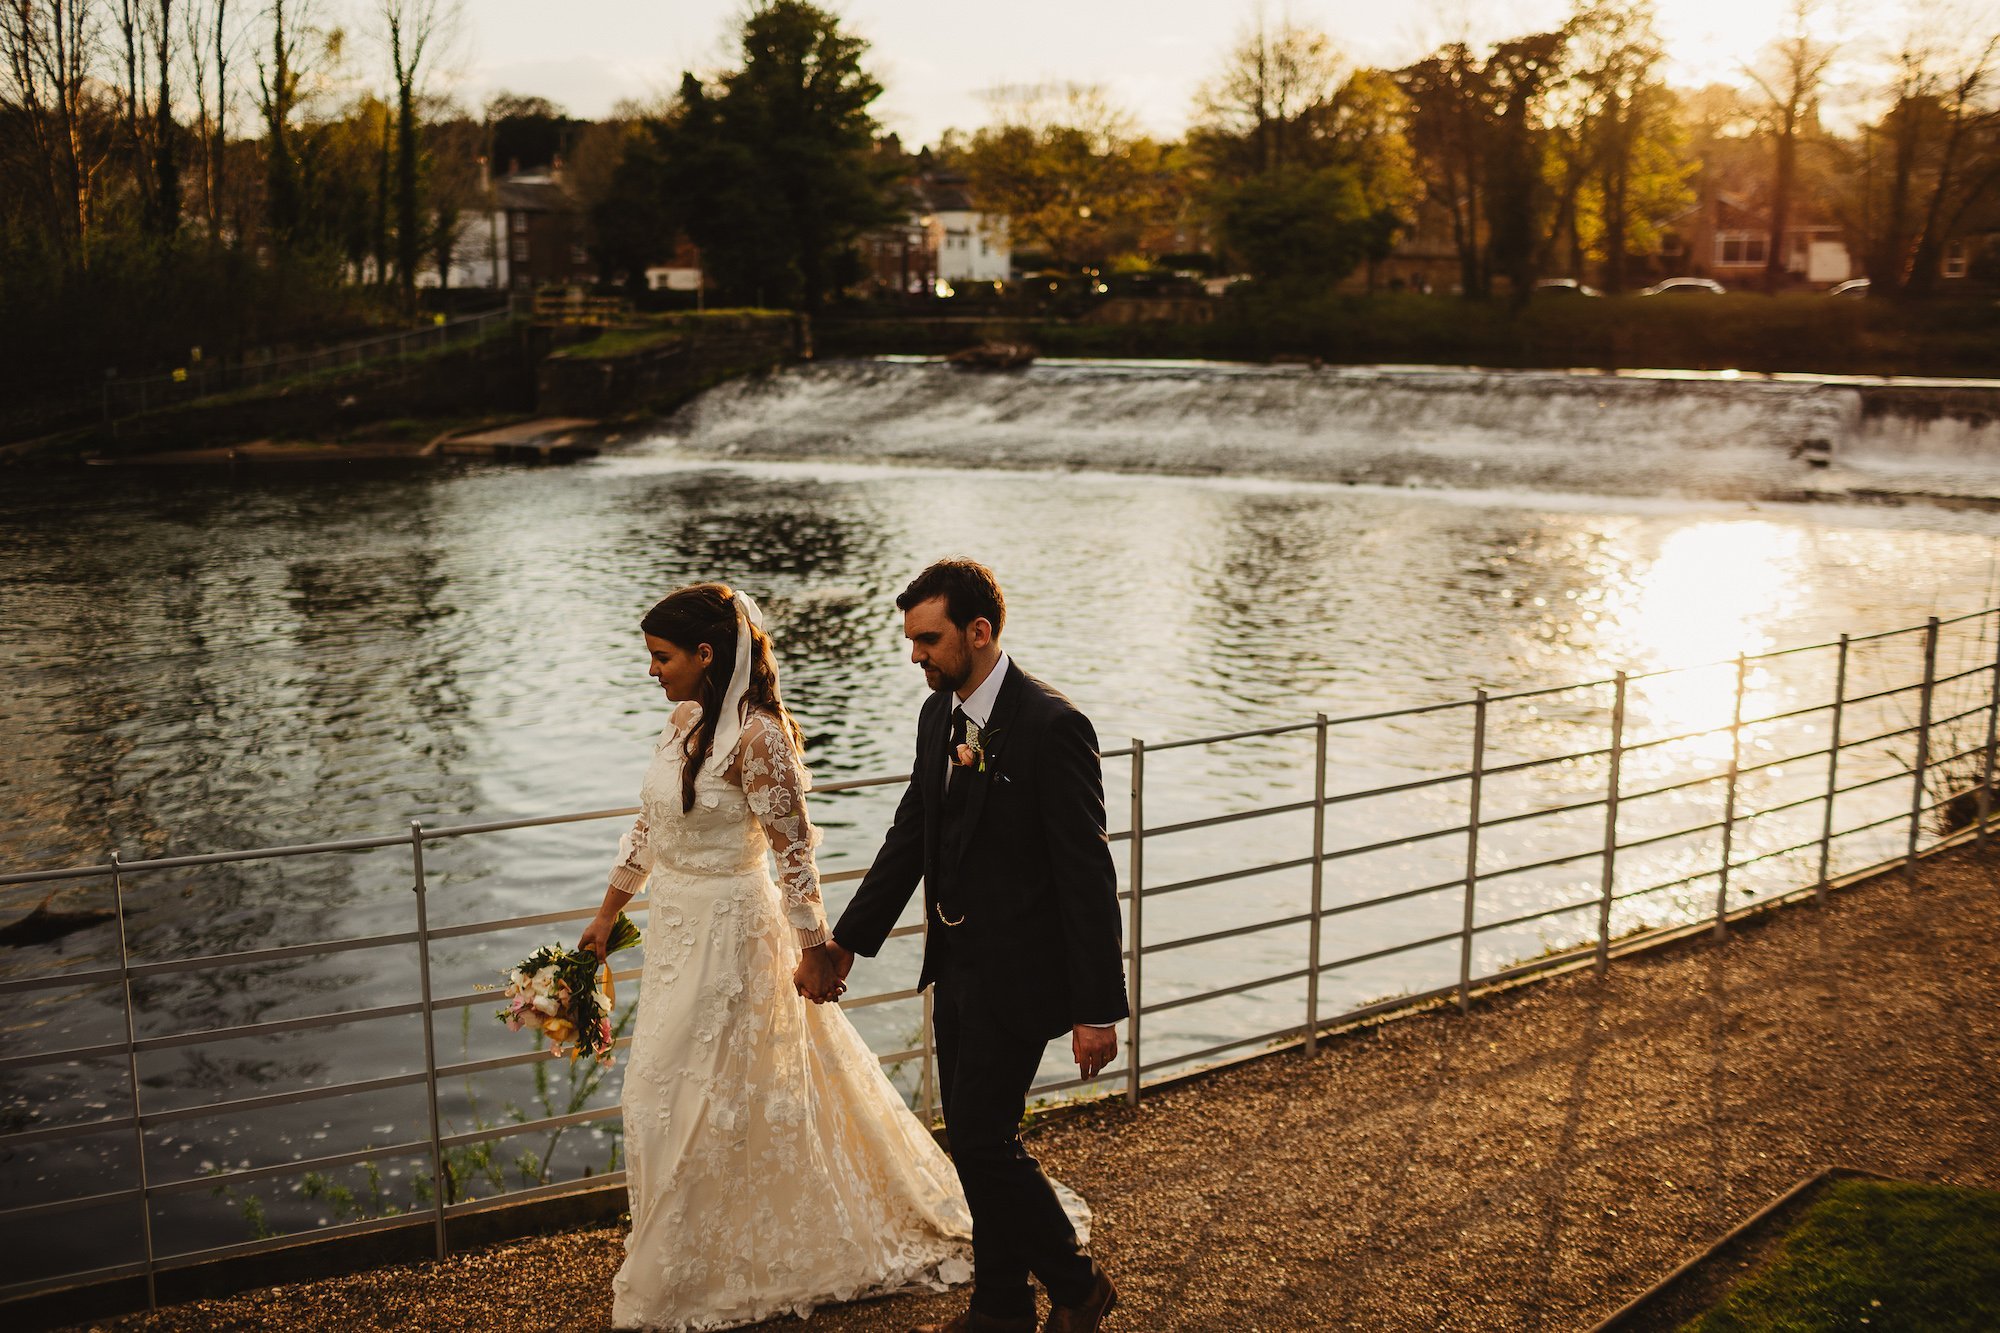 Beautiful bride Dani wore a wedding dress by Halfpenny London | Bobby top and Bay skirt with 3d embroidery